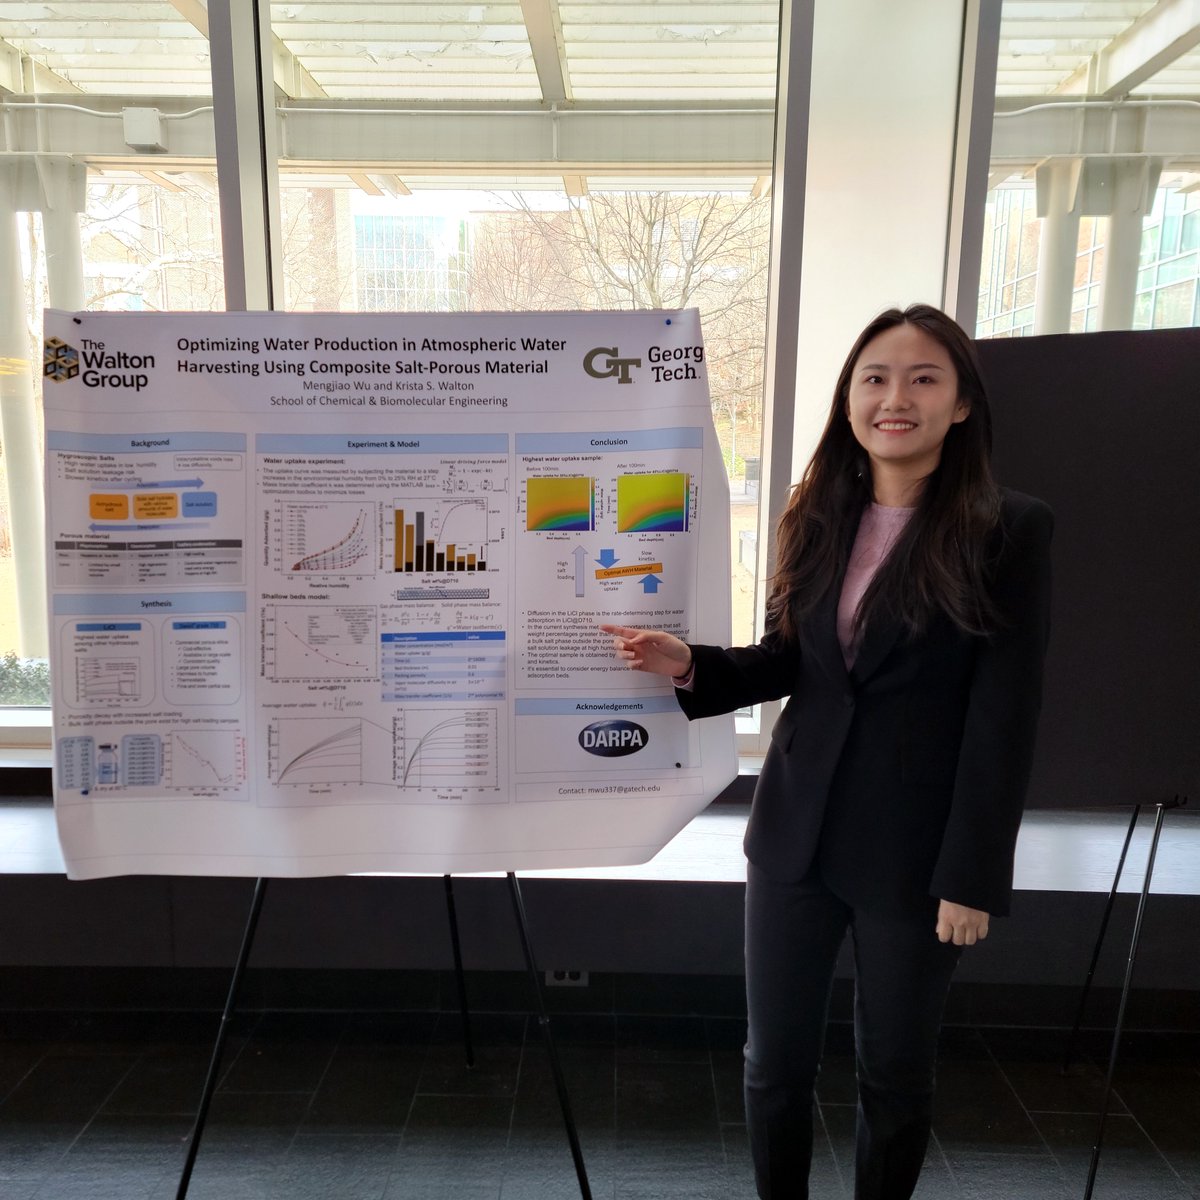 Thanks to everyone who stopped by Mengjiao's poster and has engaging discussions today at the @GTChBE Graduate Research Symposium!